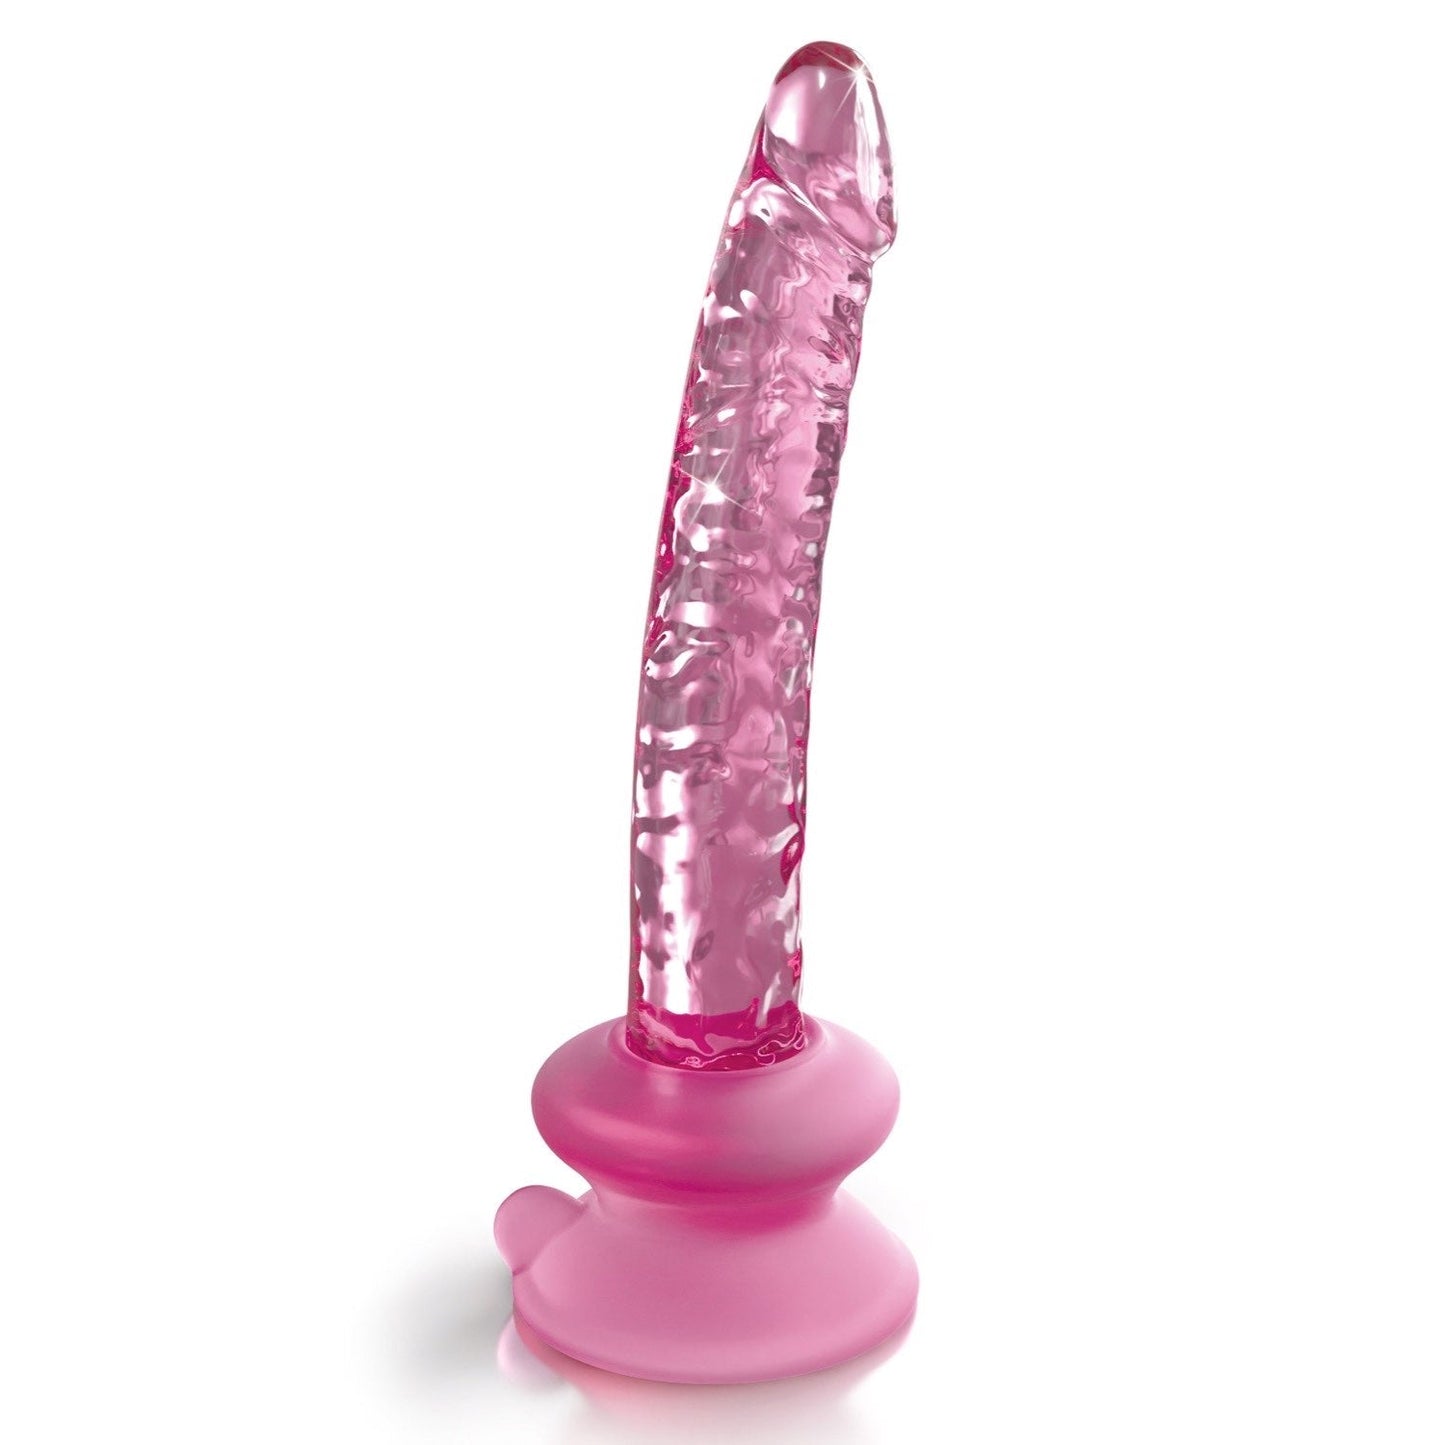 No. 86 - Pink 17 cm Glass Dong with Suction Base